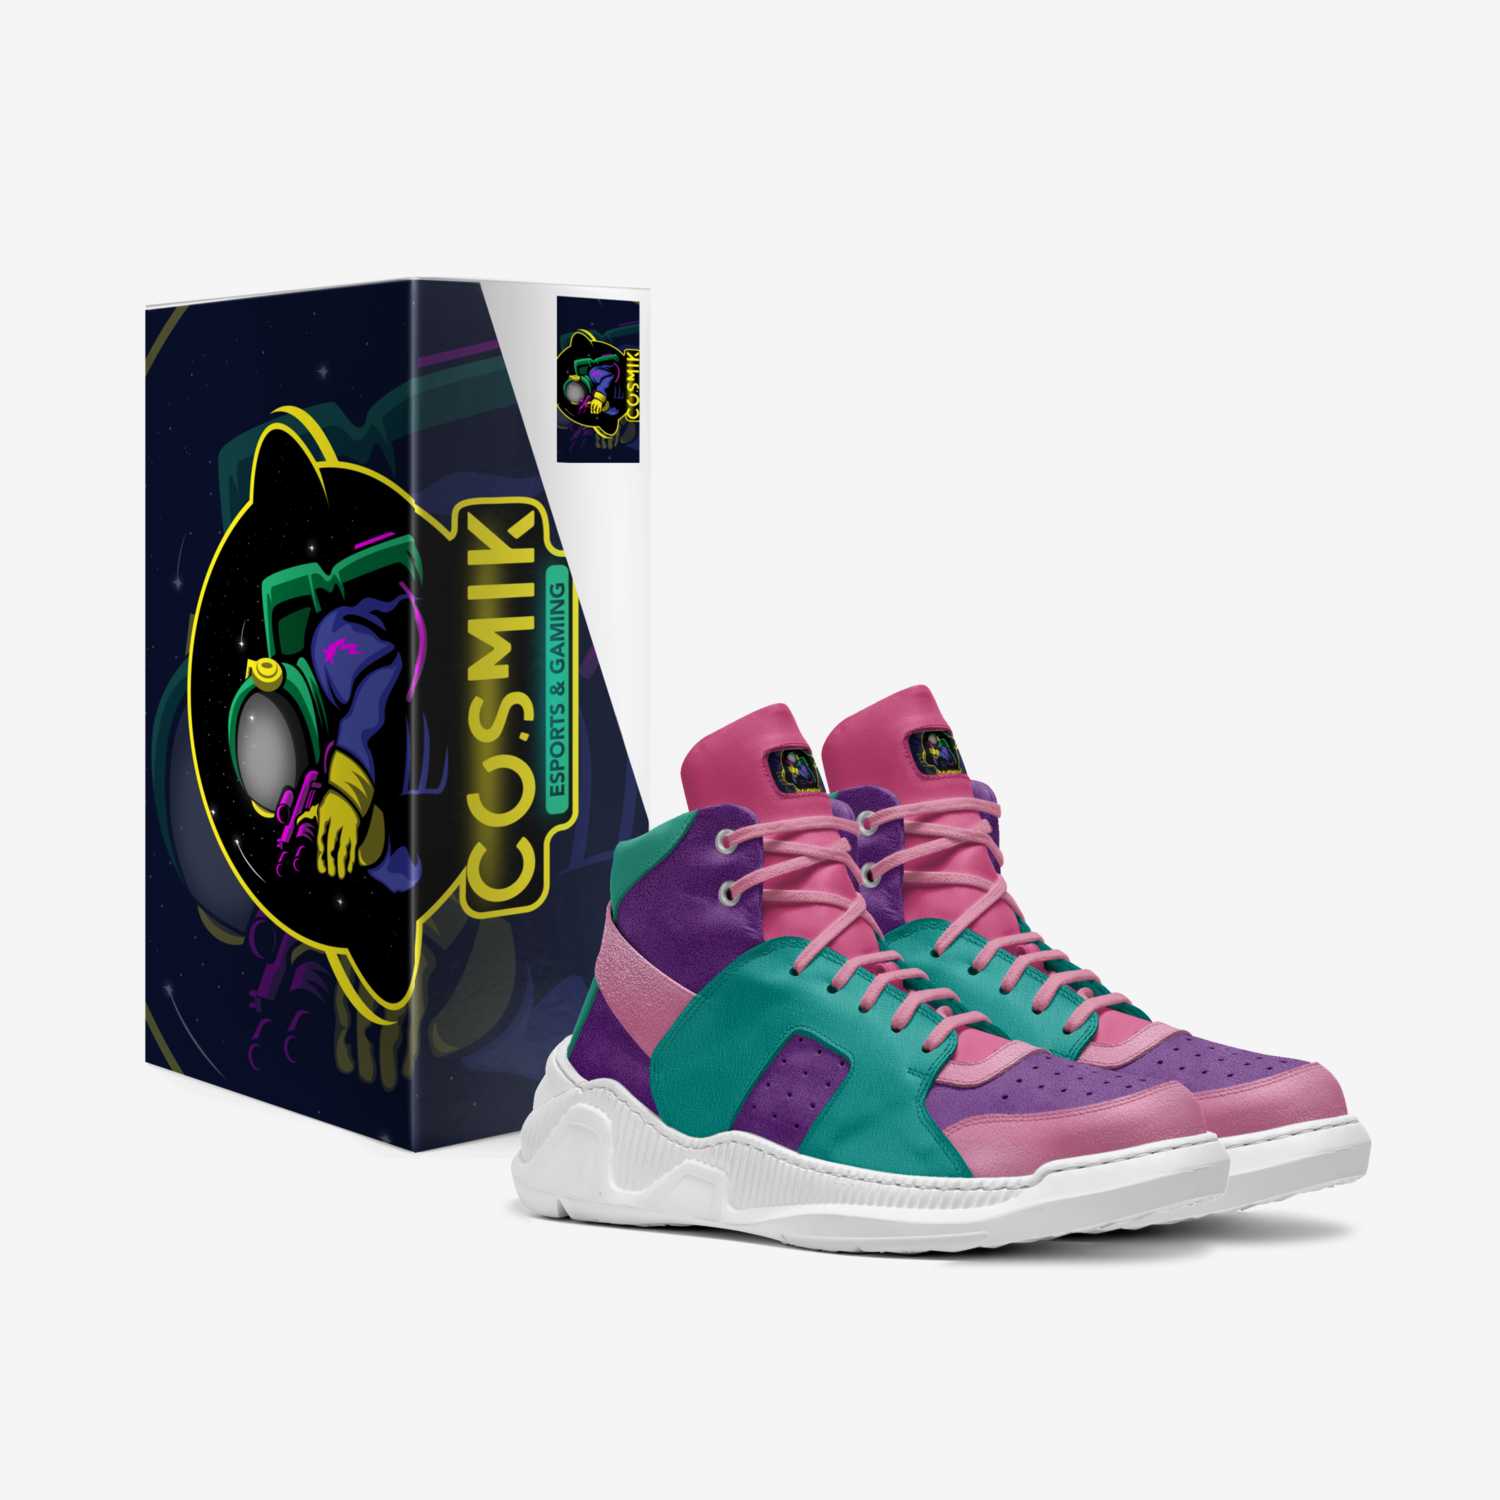 COSMIK AURORAS custom made in Italy shoes by Physiks | Box view